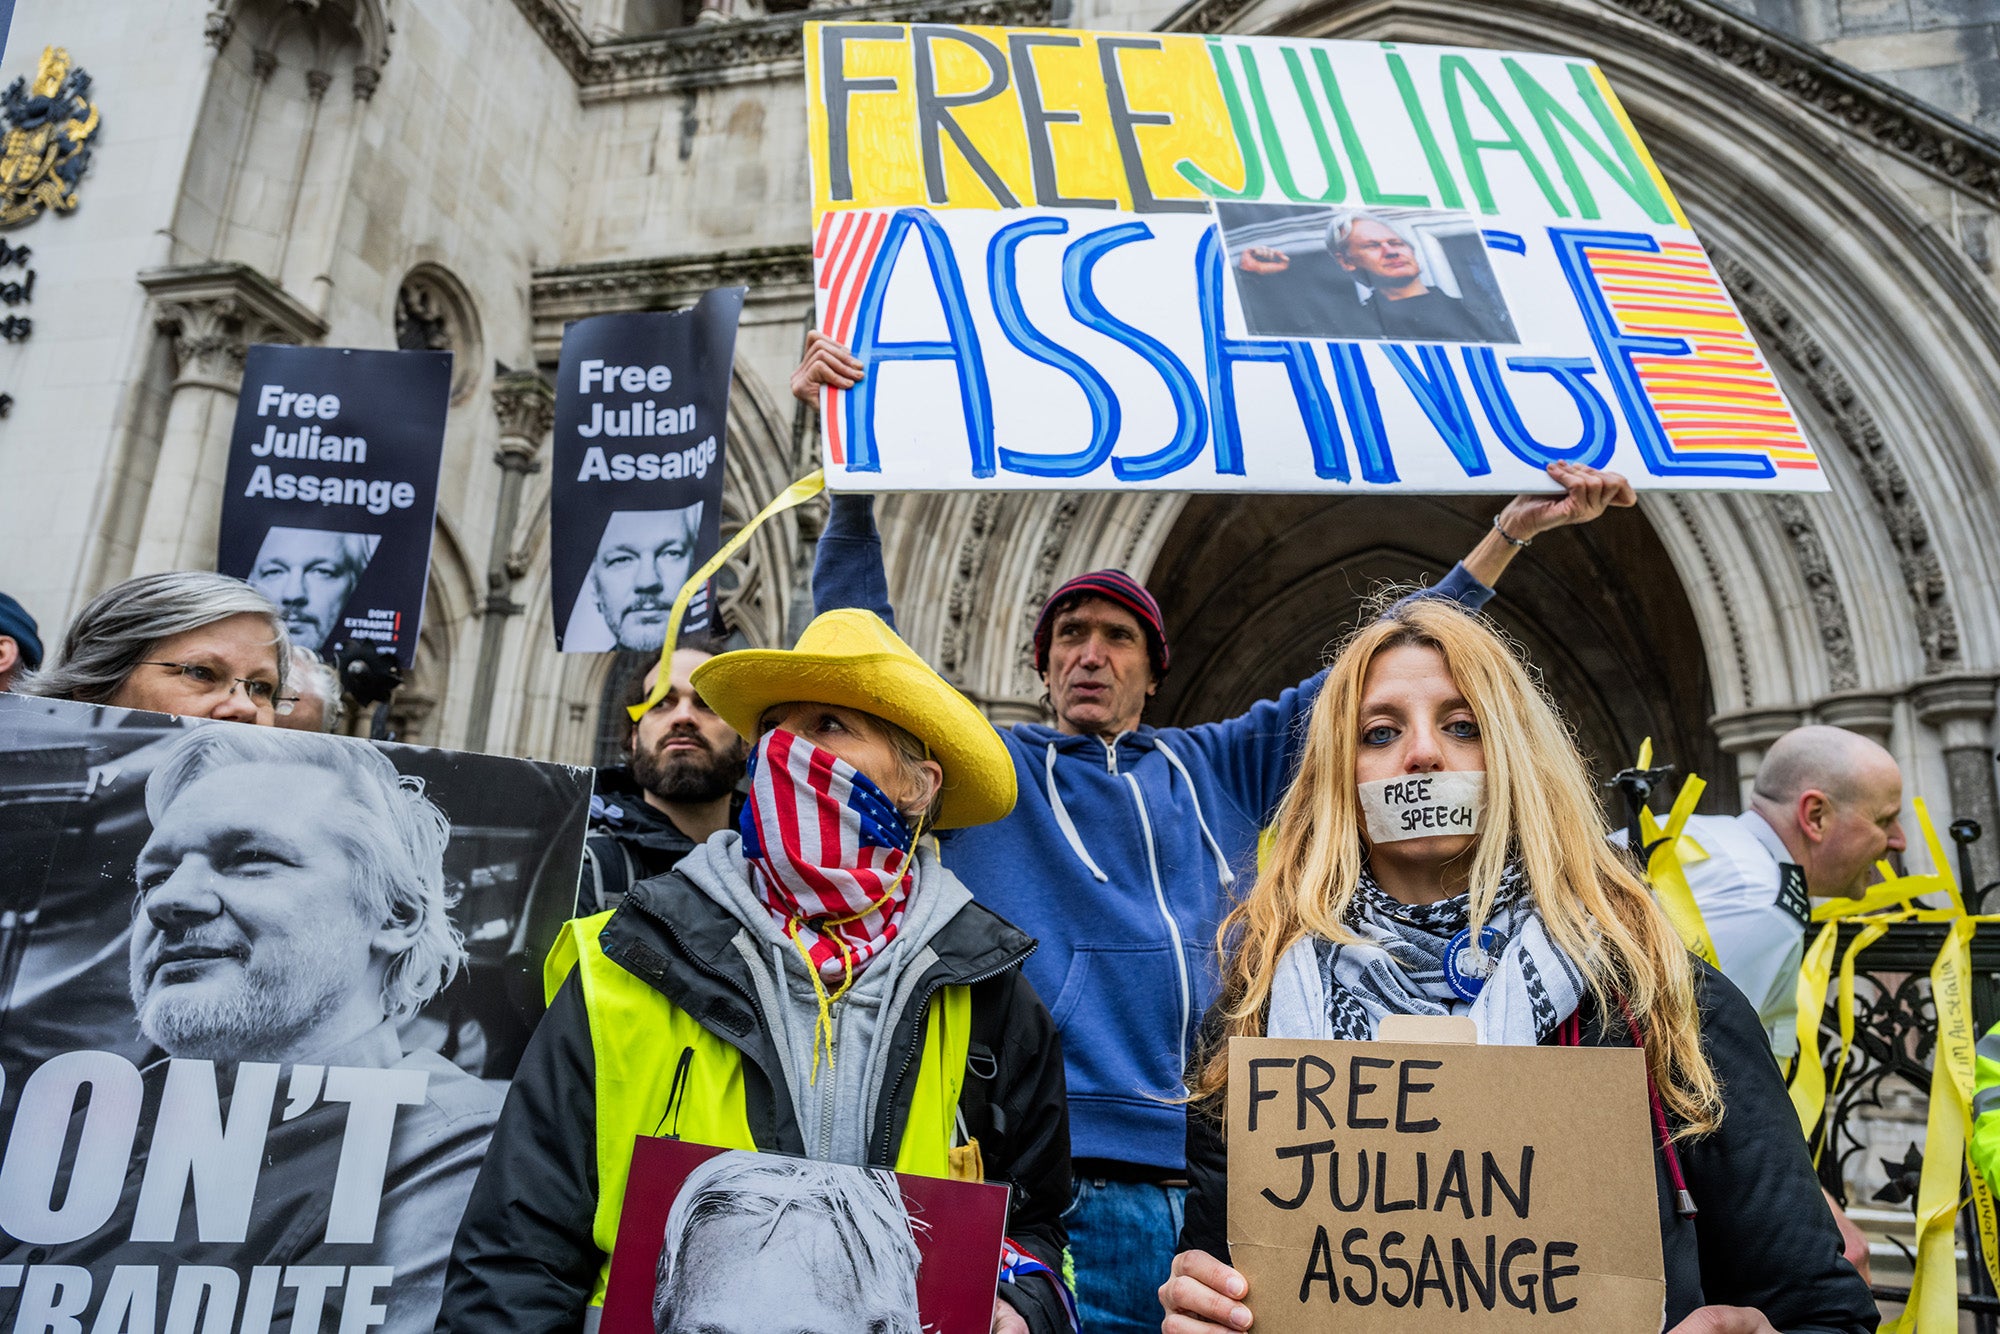 Demonstrators chanted ‘free Julian Assange’ outside the Royal Courts of Justice